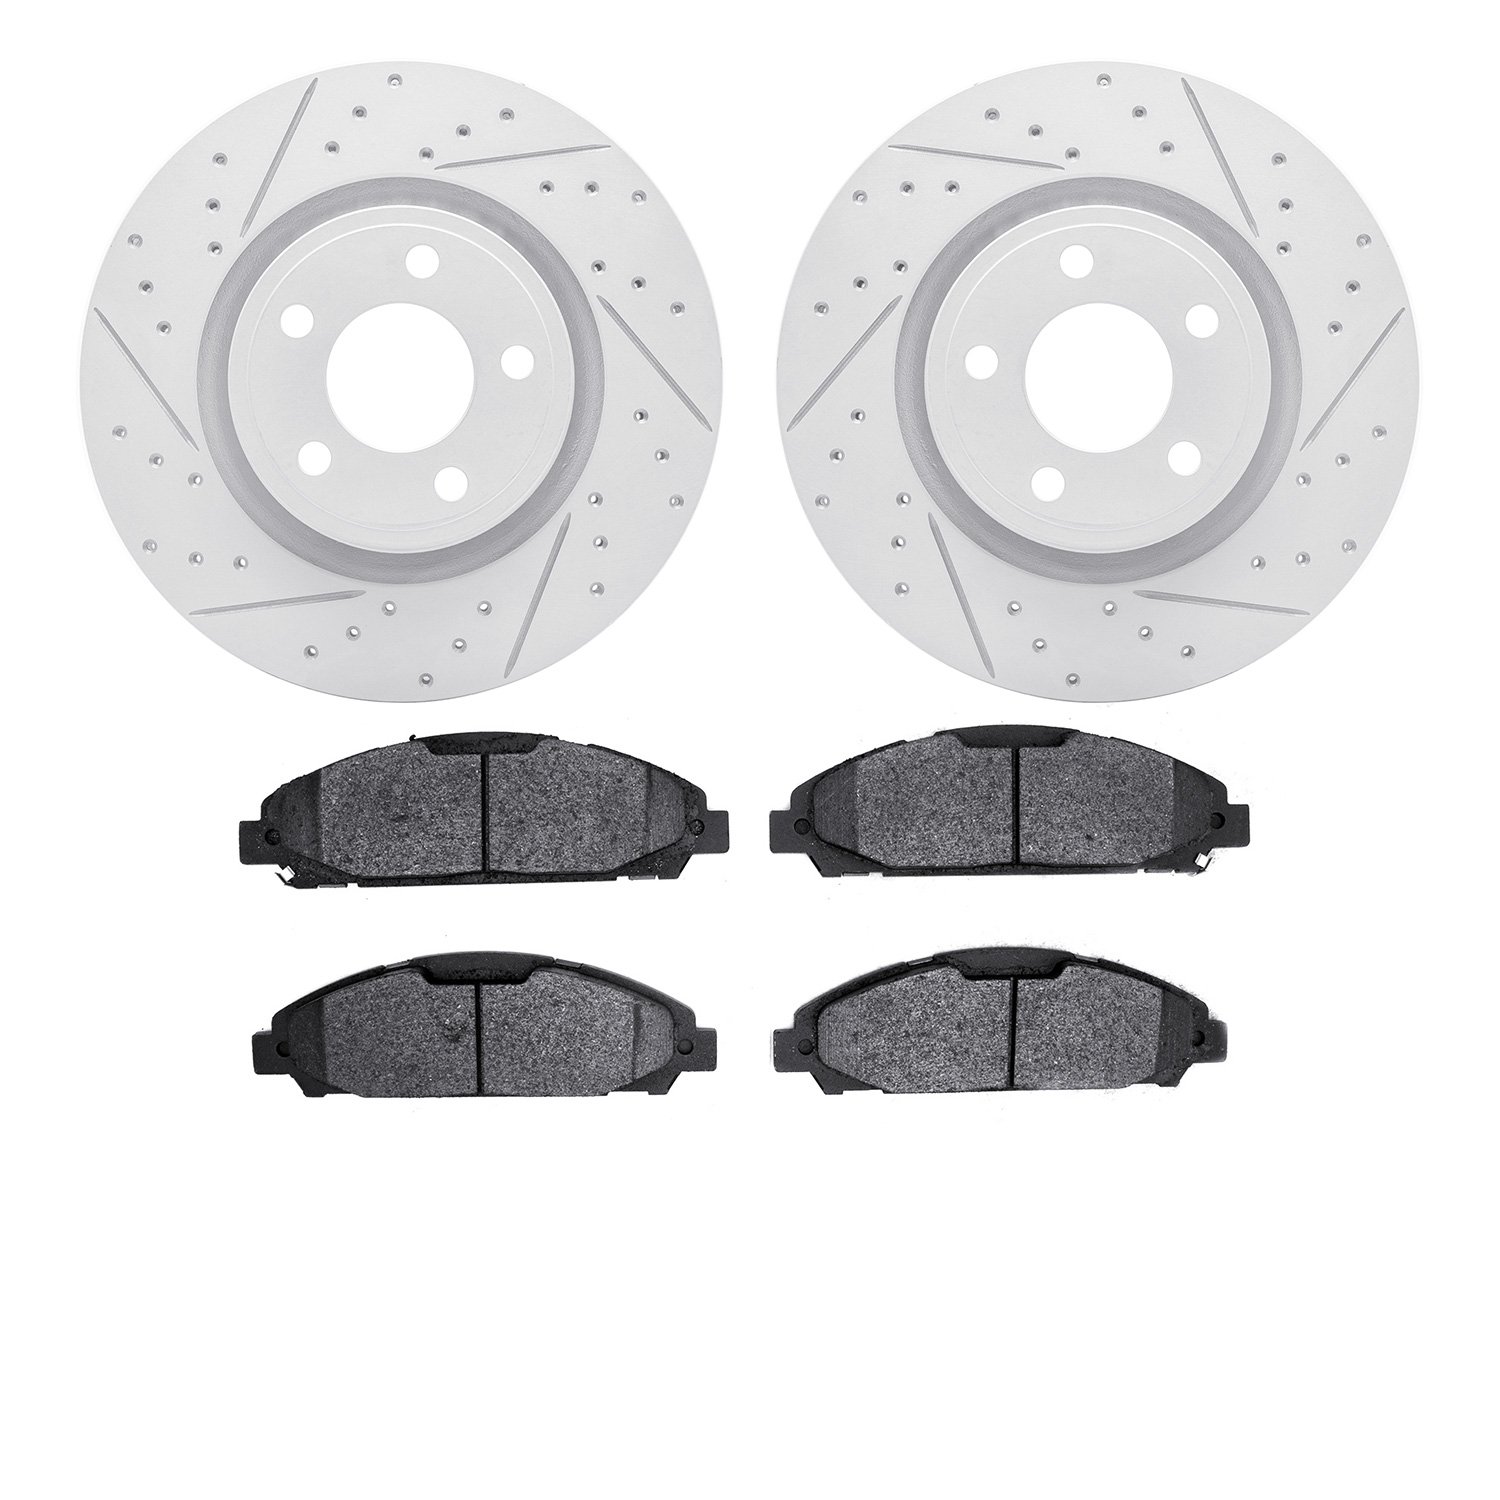 2502-54080 Geoperformance Drilled/Slotted Rotors w/5000 Advanced Brake Pads Kit, 2015-2020 Ford/Lincoln/Mercury/Mazda, Position: